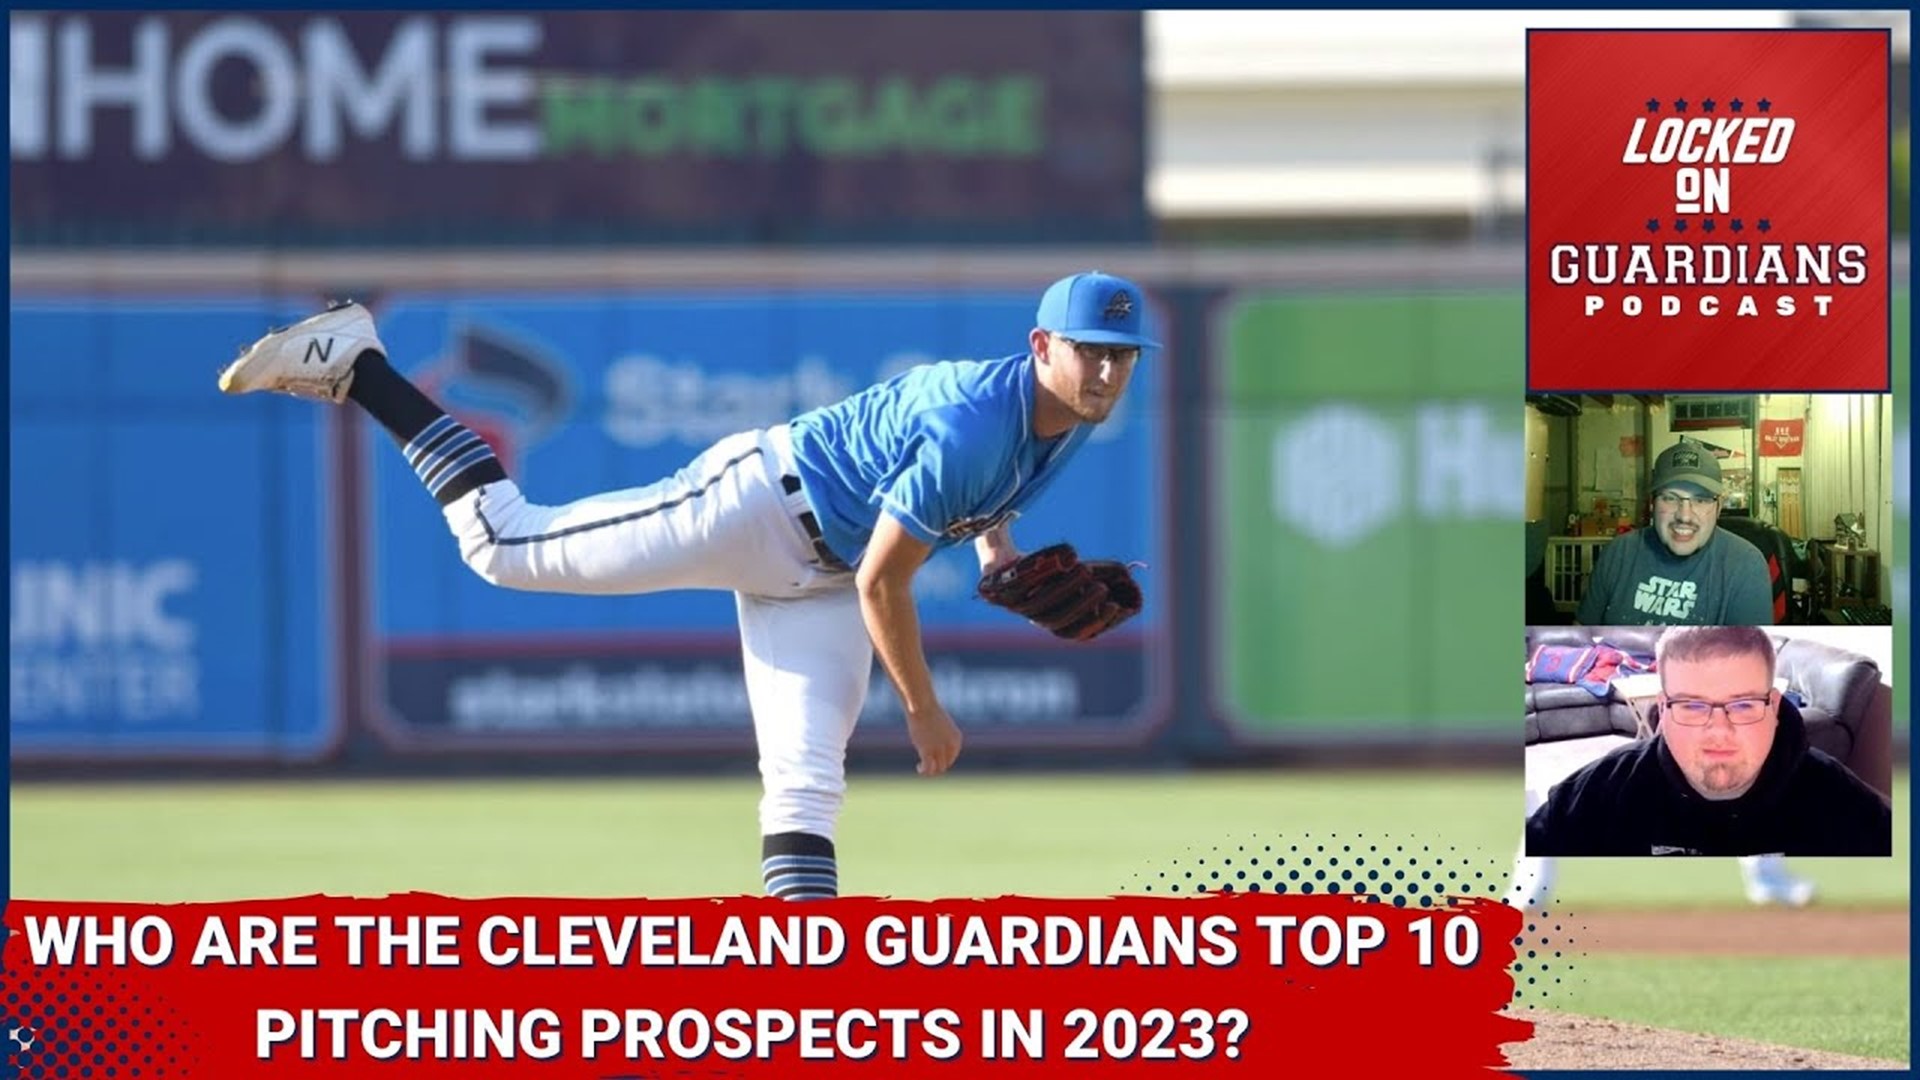 We give our top 10 Cleveland Guardians starting pitching prospects after our long discussion on the after show about the minor league rotations.